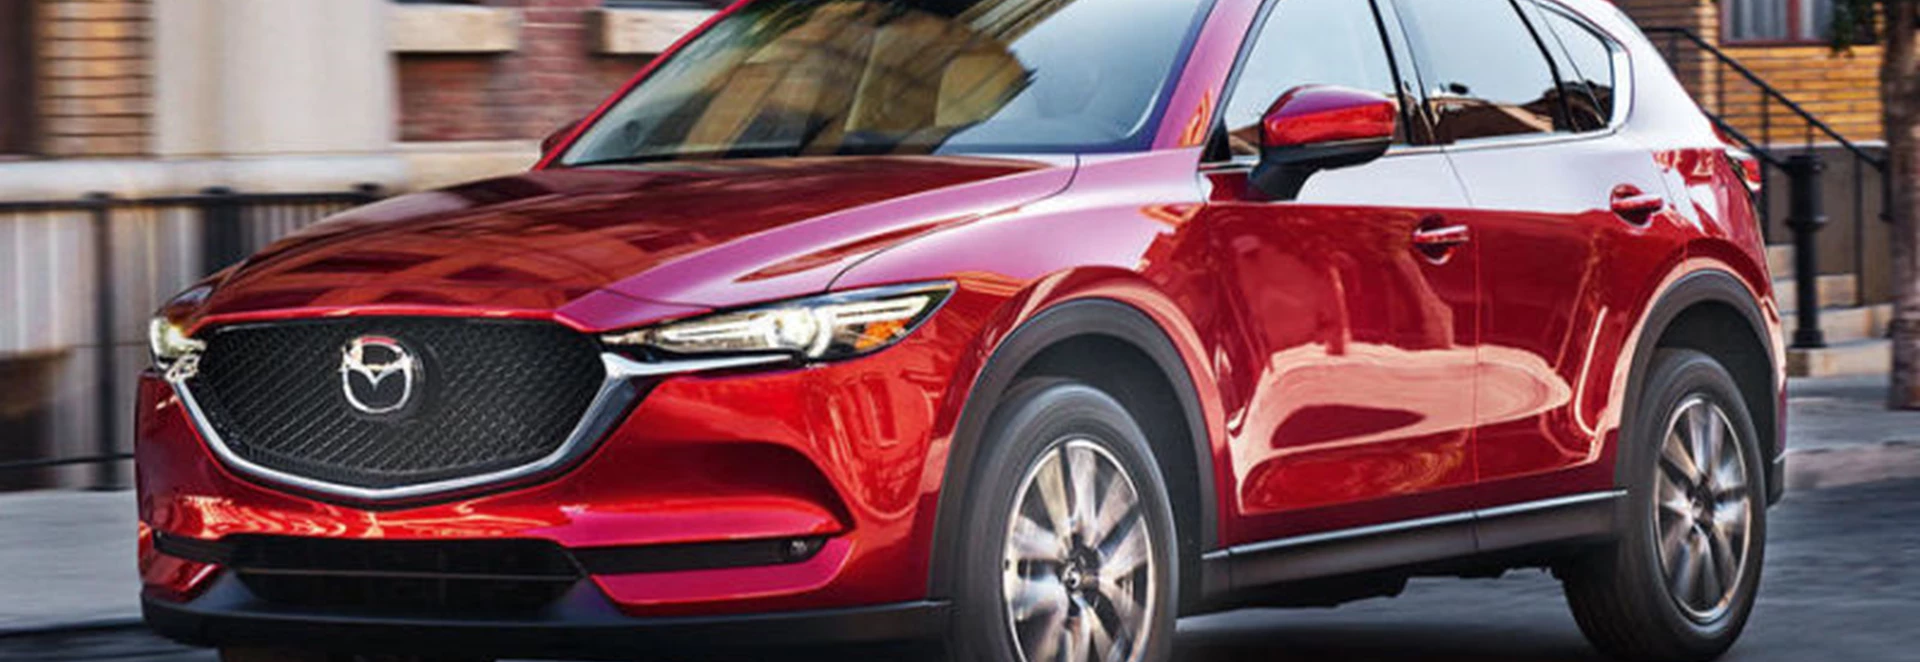 The 2017 Mazda CX-5 is here